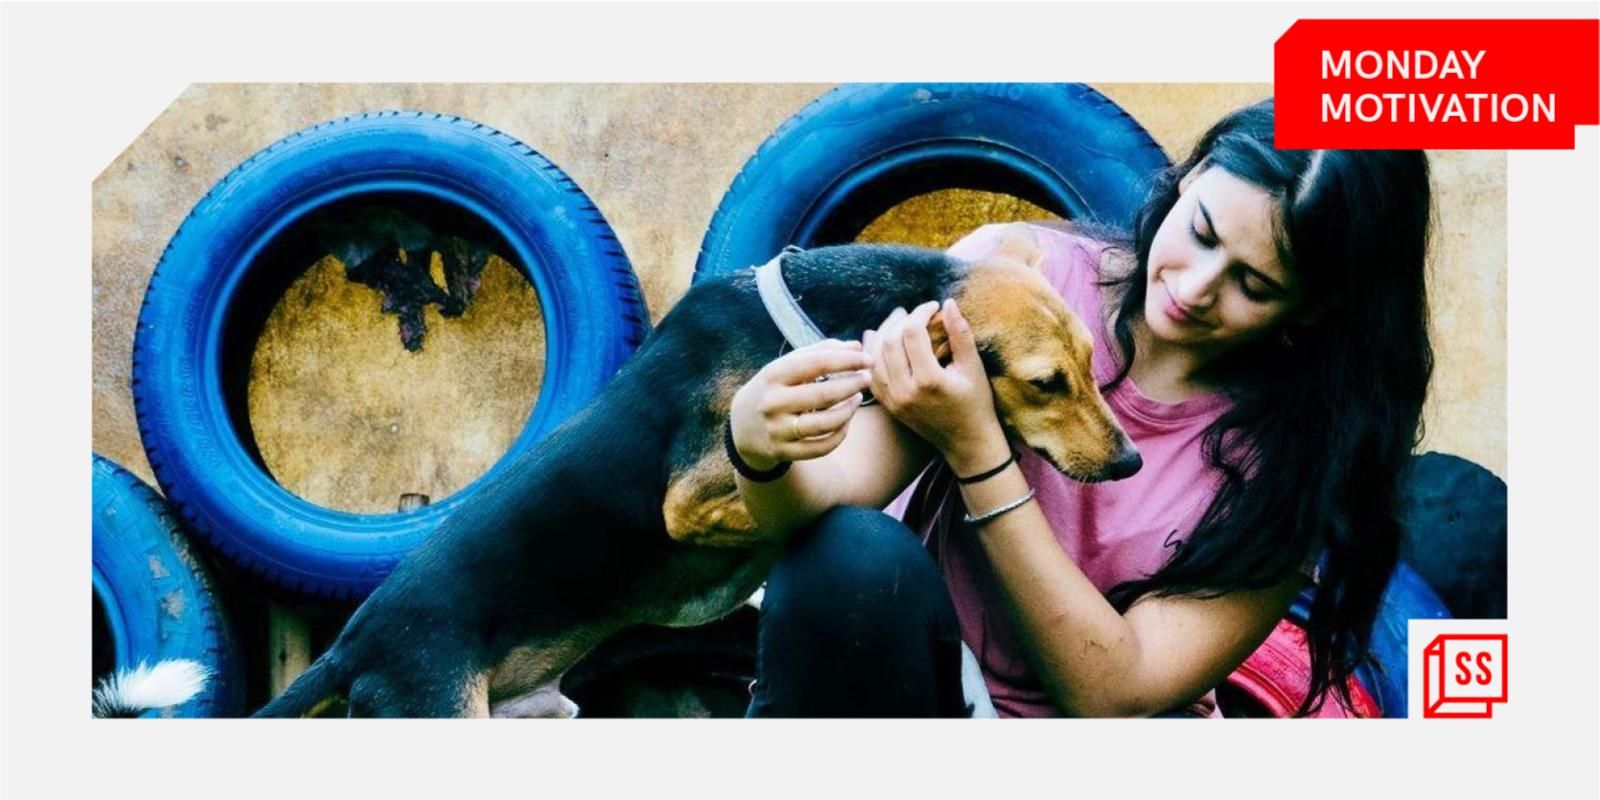 [Monday Motivation] Meet the 26-year-old feeding 200+ stray dogs in Faridabad every day